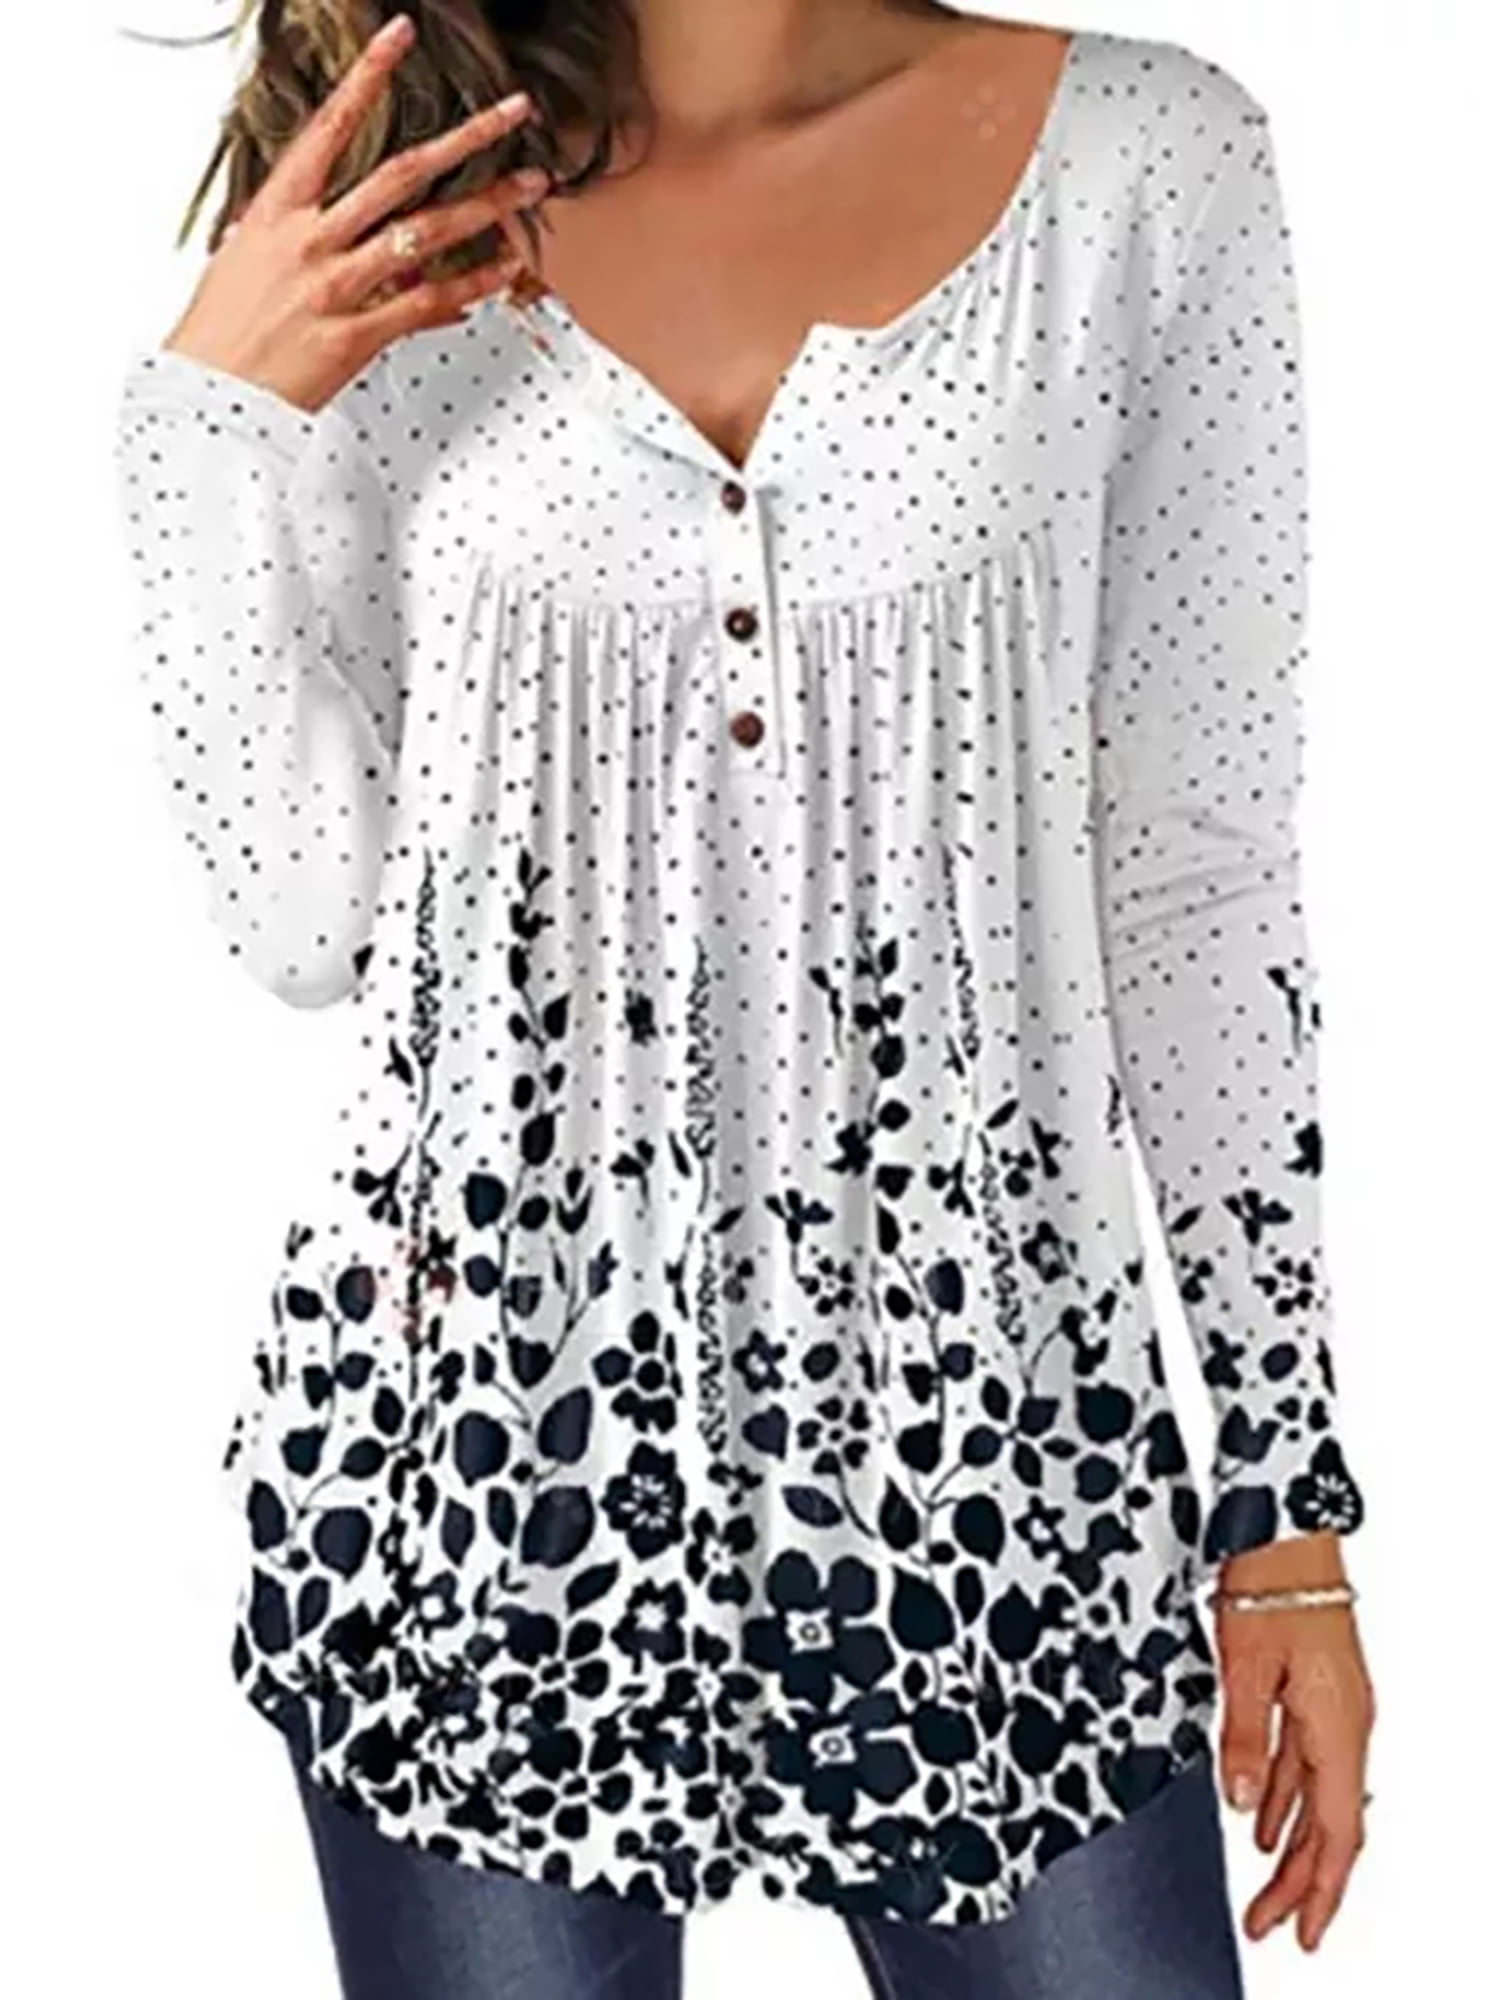 Ladies Long Tunic top Lagenlook Lace Crochet Party Evening Dressy Casual